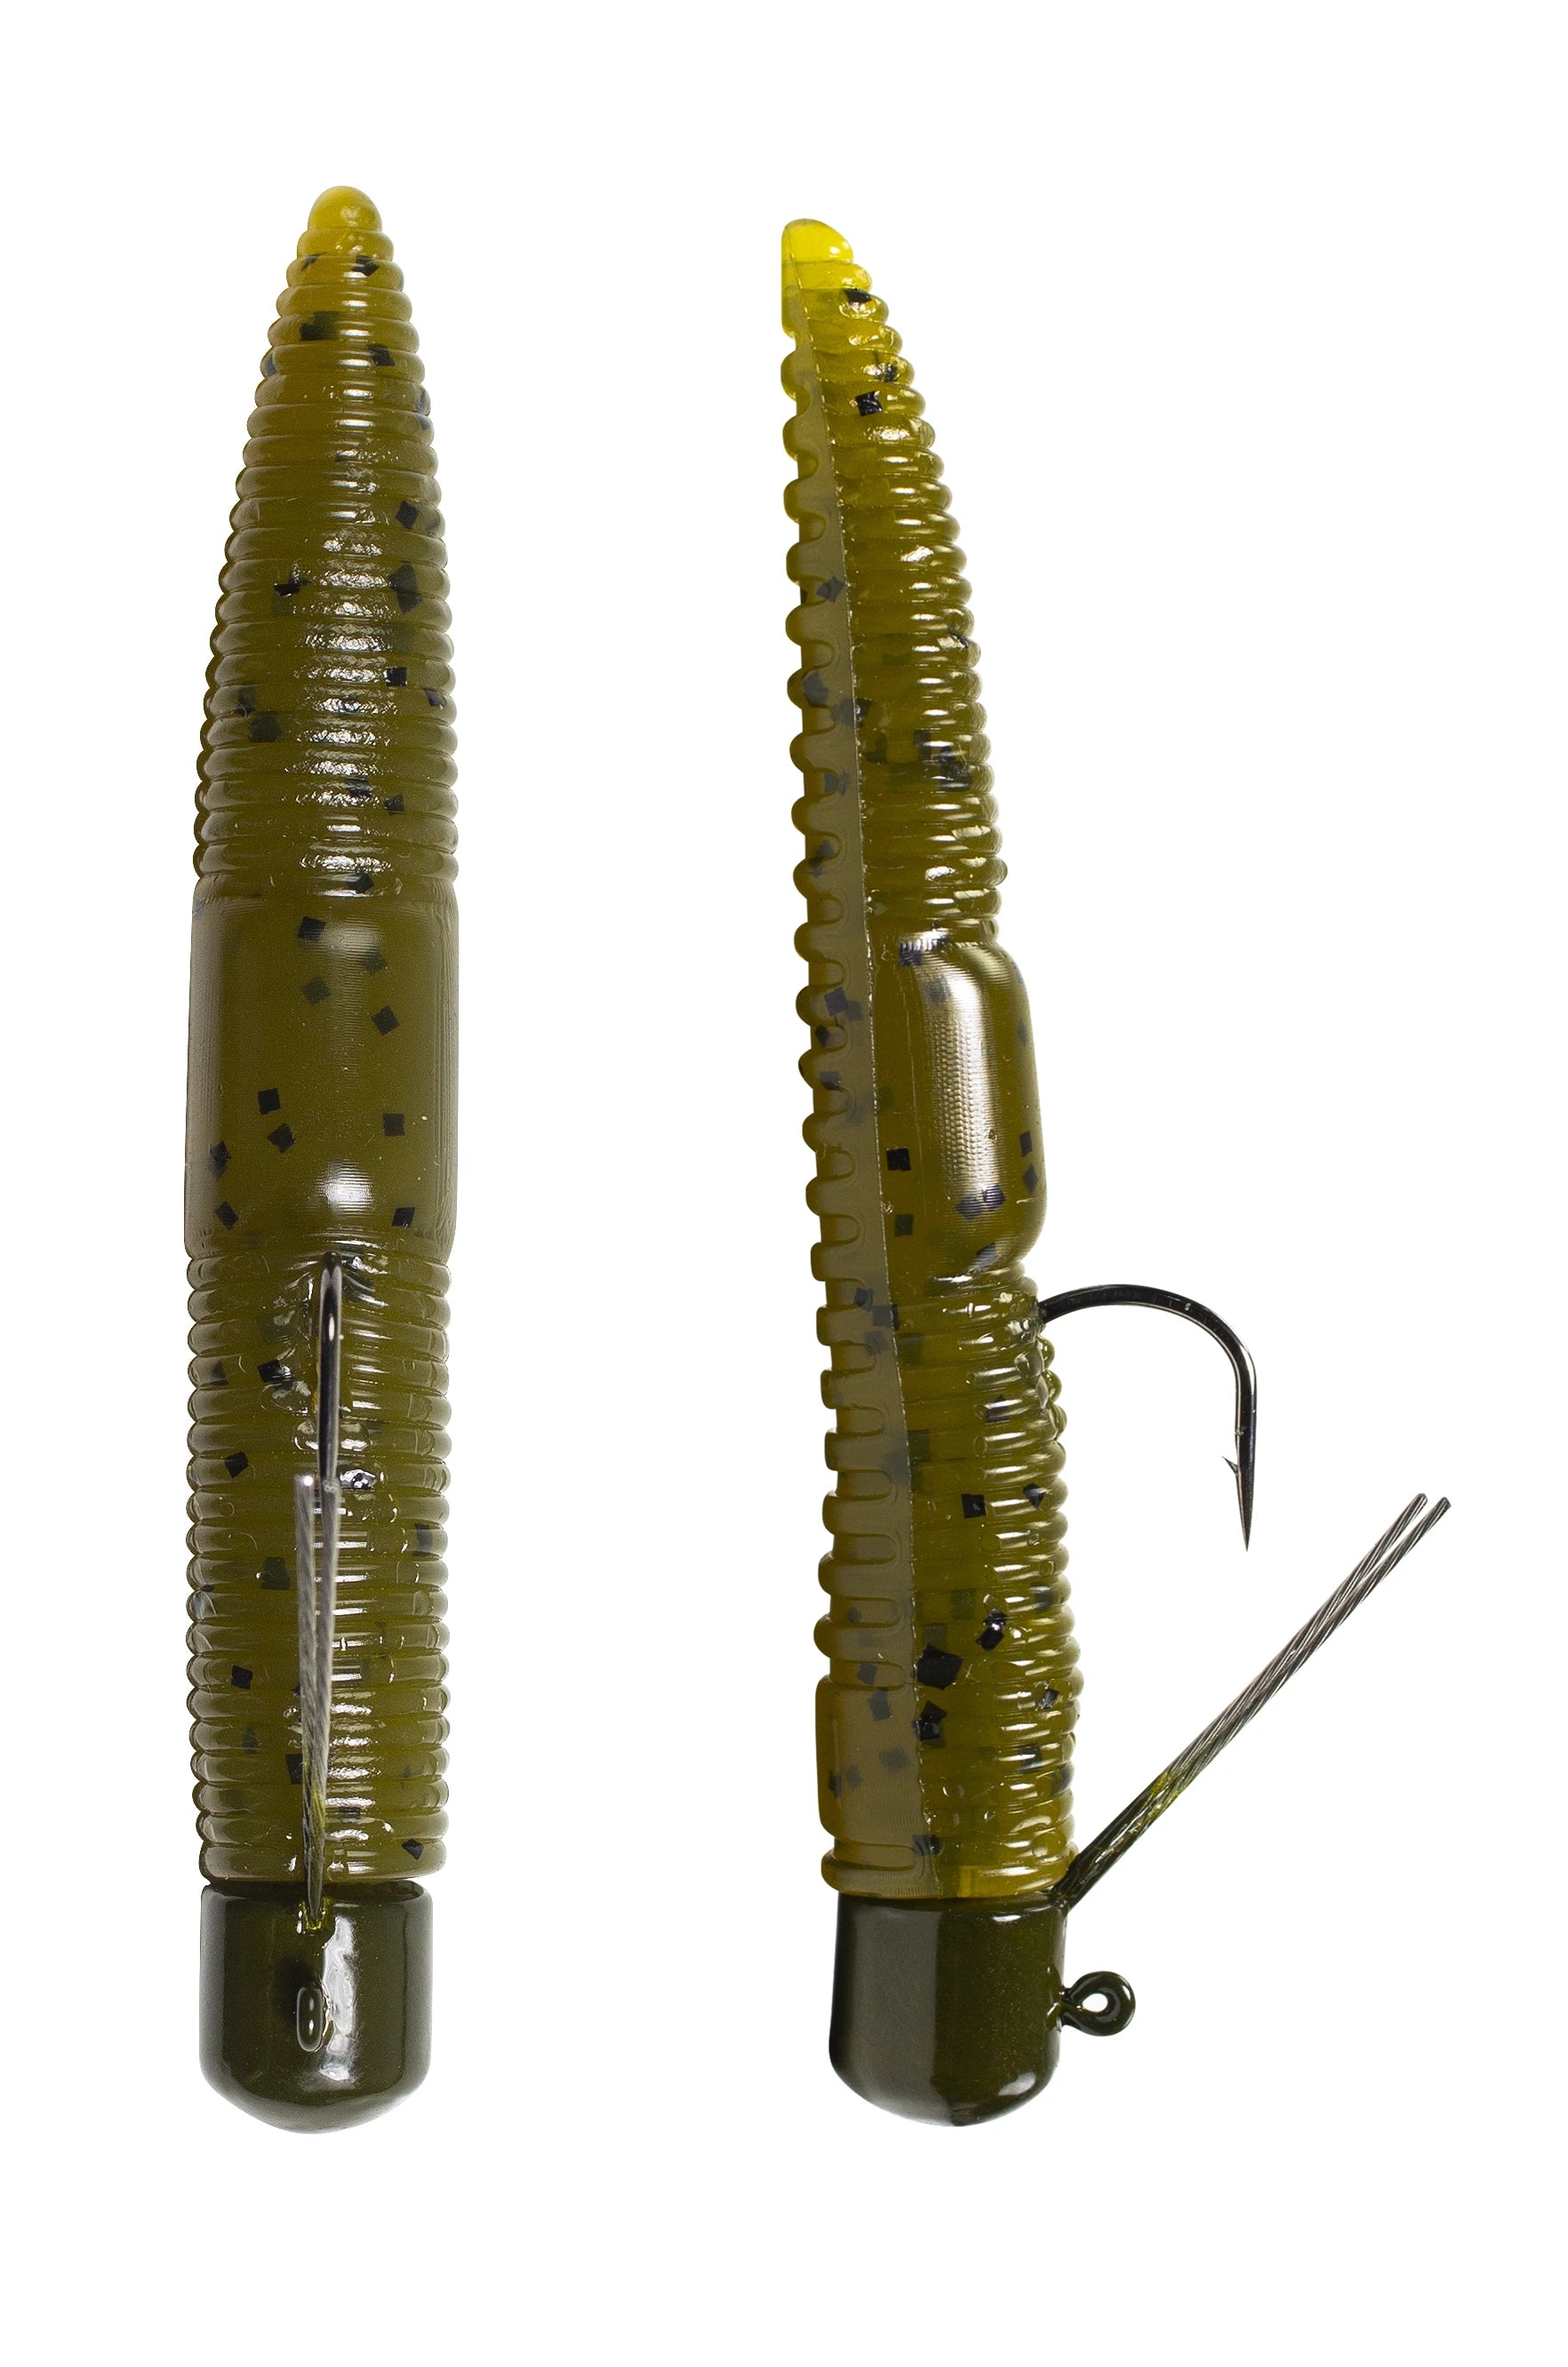 BUYER'S GUIDE: Ned Rig Baits, Rigging, And Finesse Fishing Gear